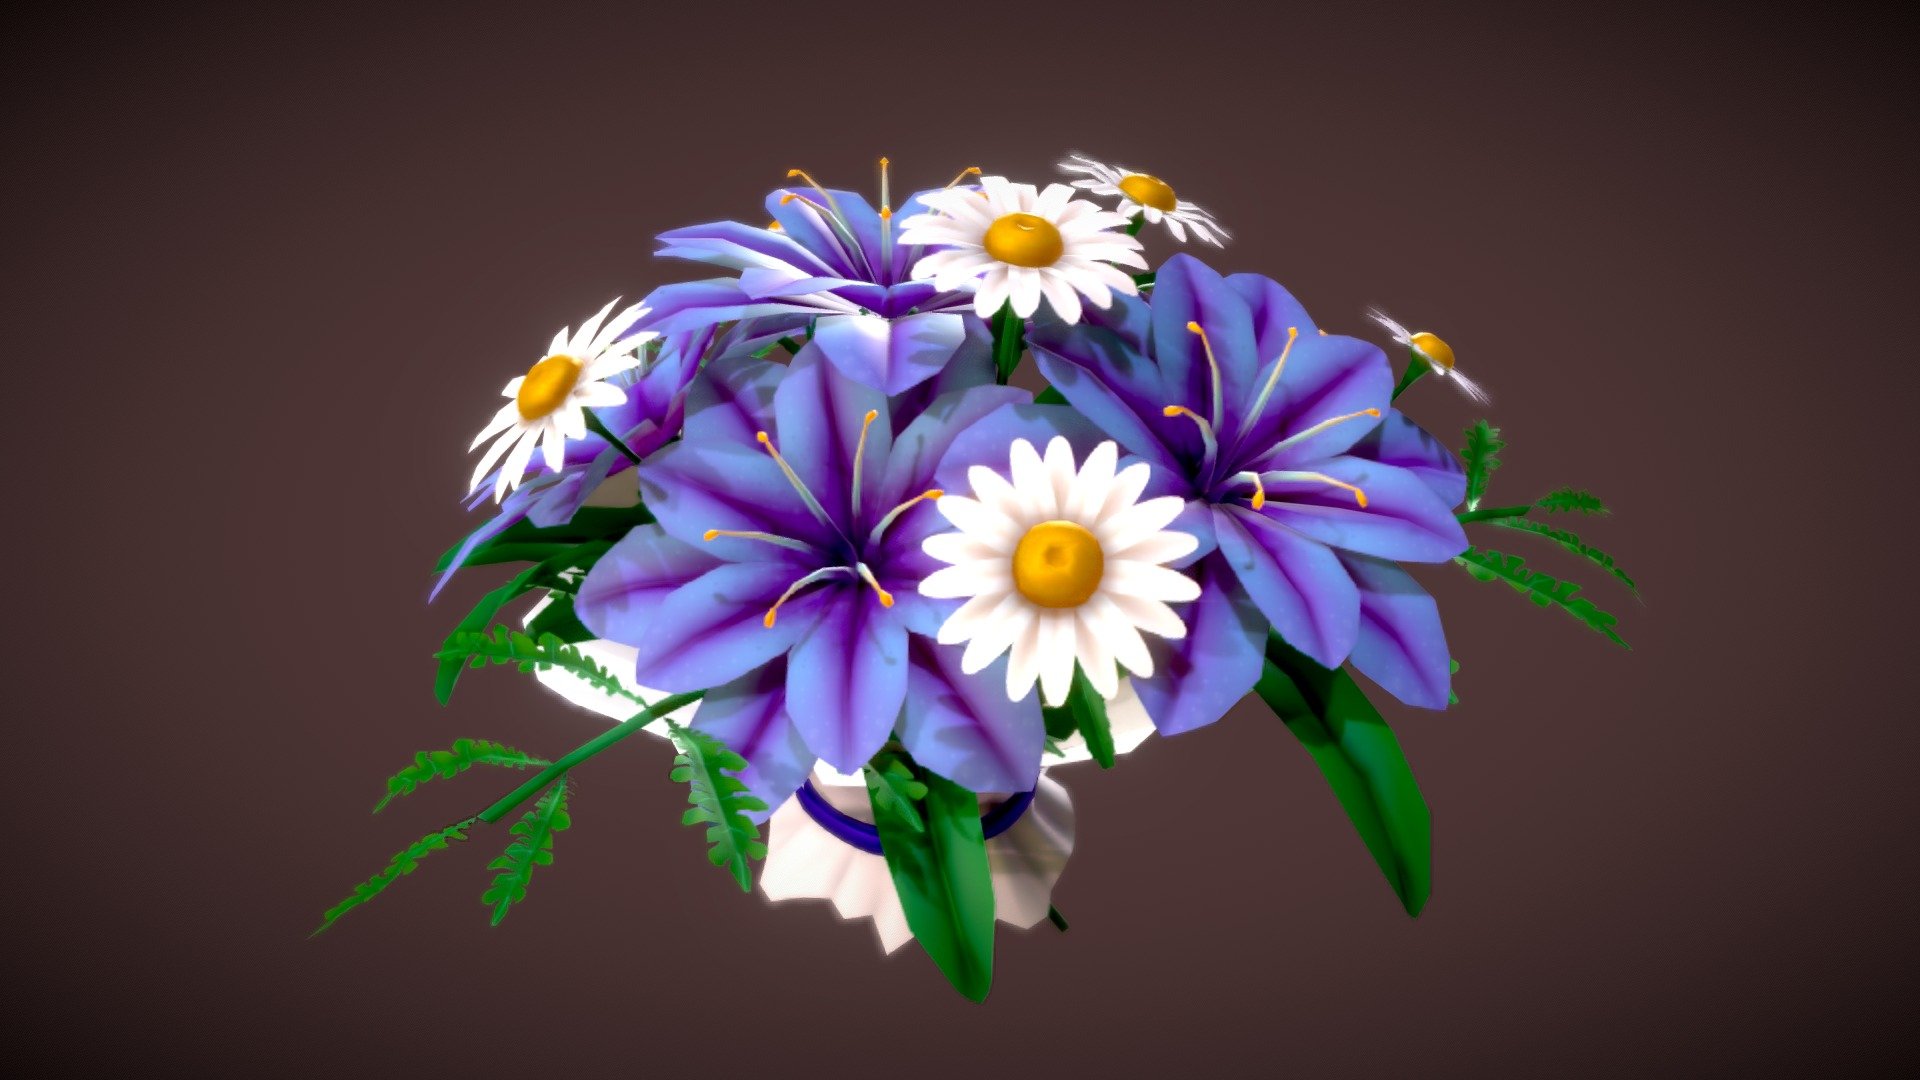 Some flowers I made for my mom for her birthday

Happy Birthday =) - Bouquet - 3D model by RoseRedTiger 3d model